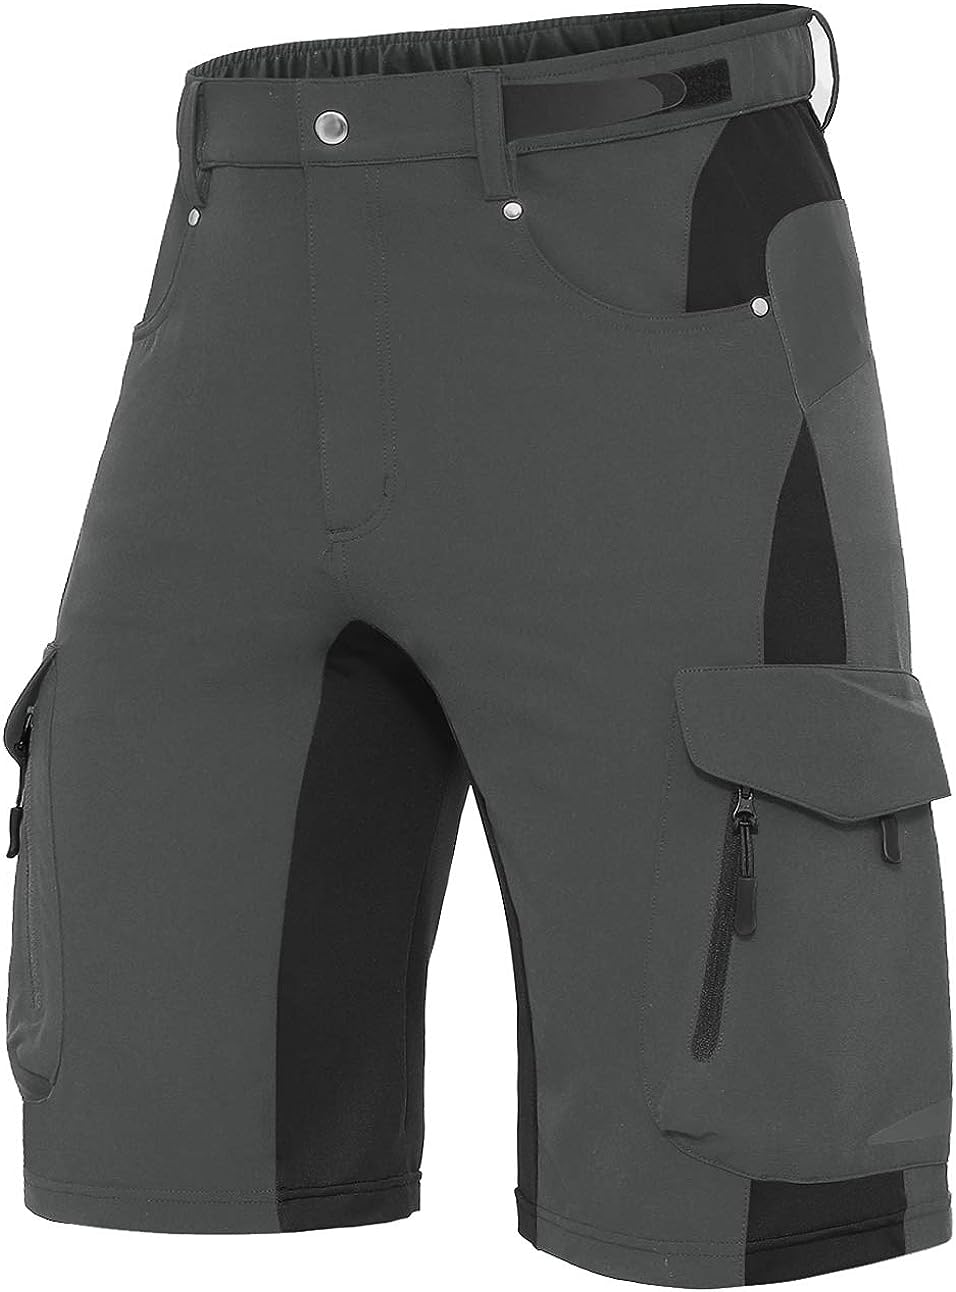 Men's Outdoor Quick Dry Lightweight Stretchy Shorts for Hiking #Color_dark grey